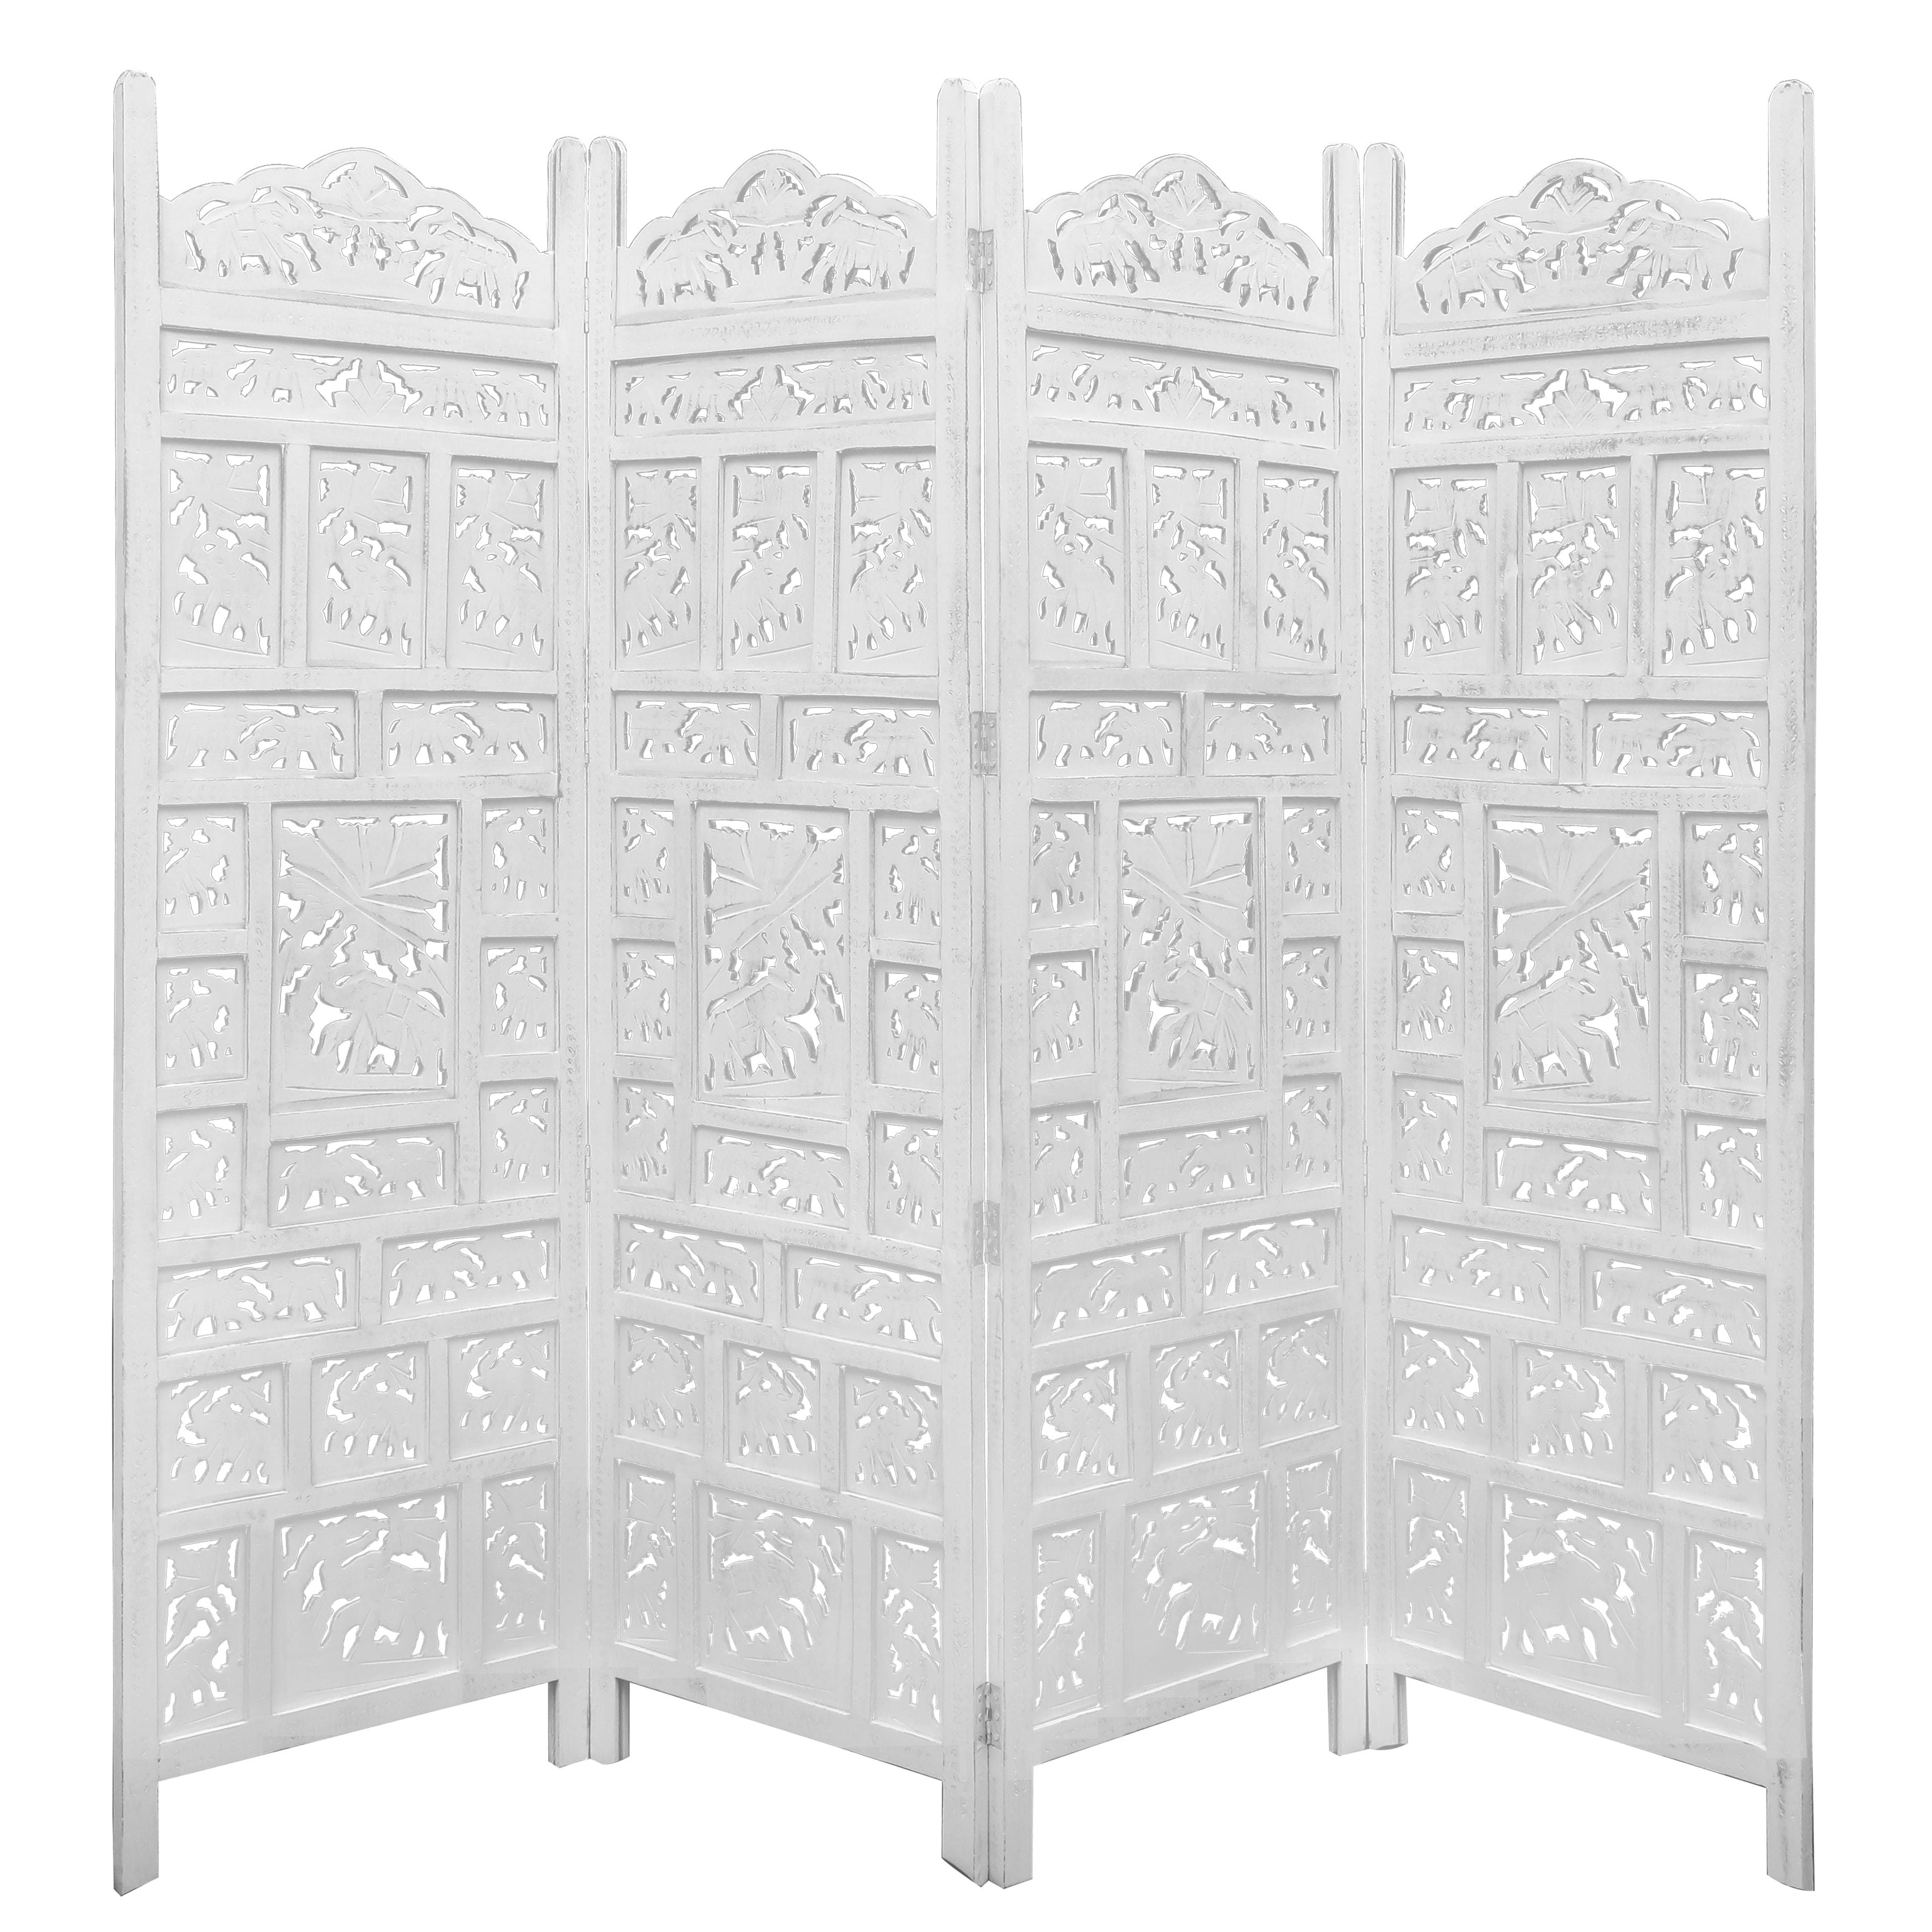 White Shoji Timber Wood Stand for Elephant 4 Panel Room Divider Screen